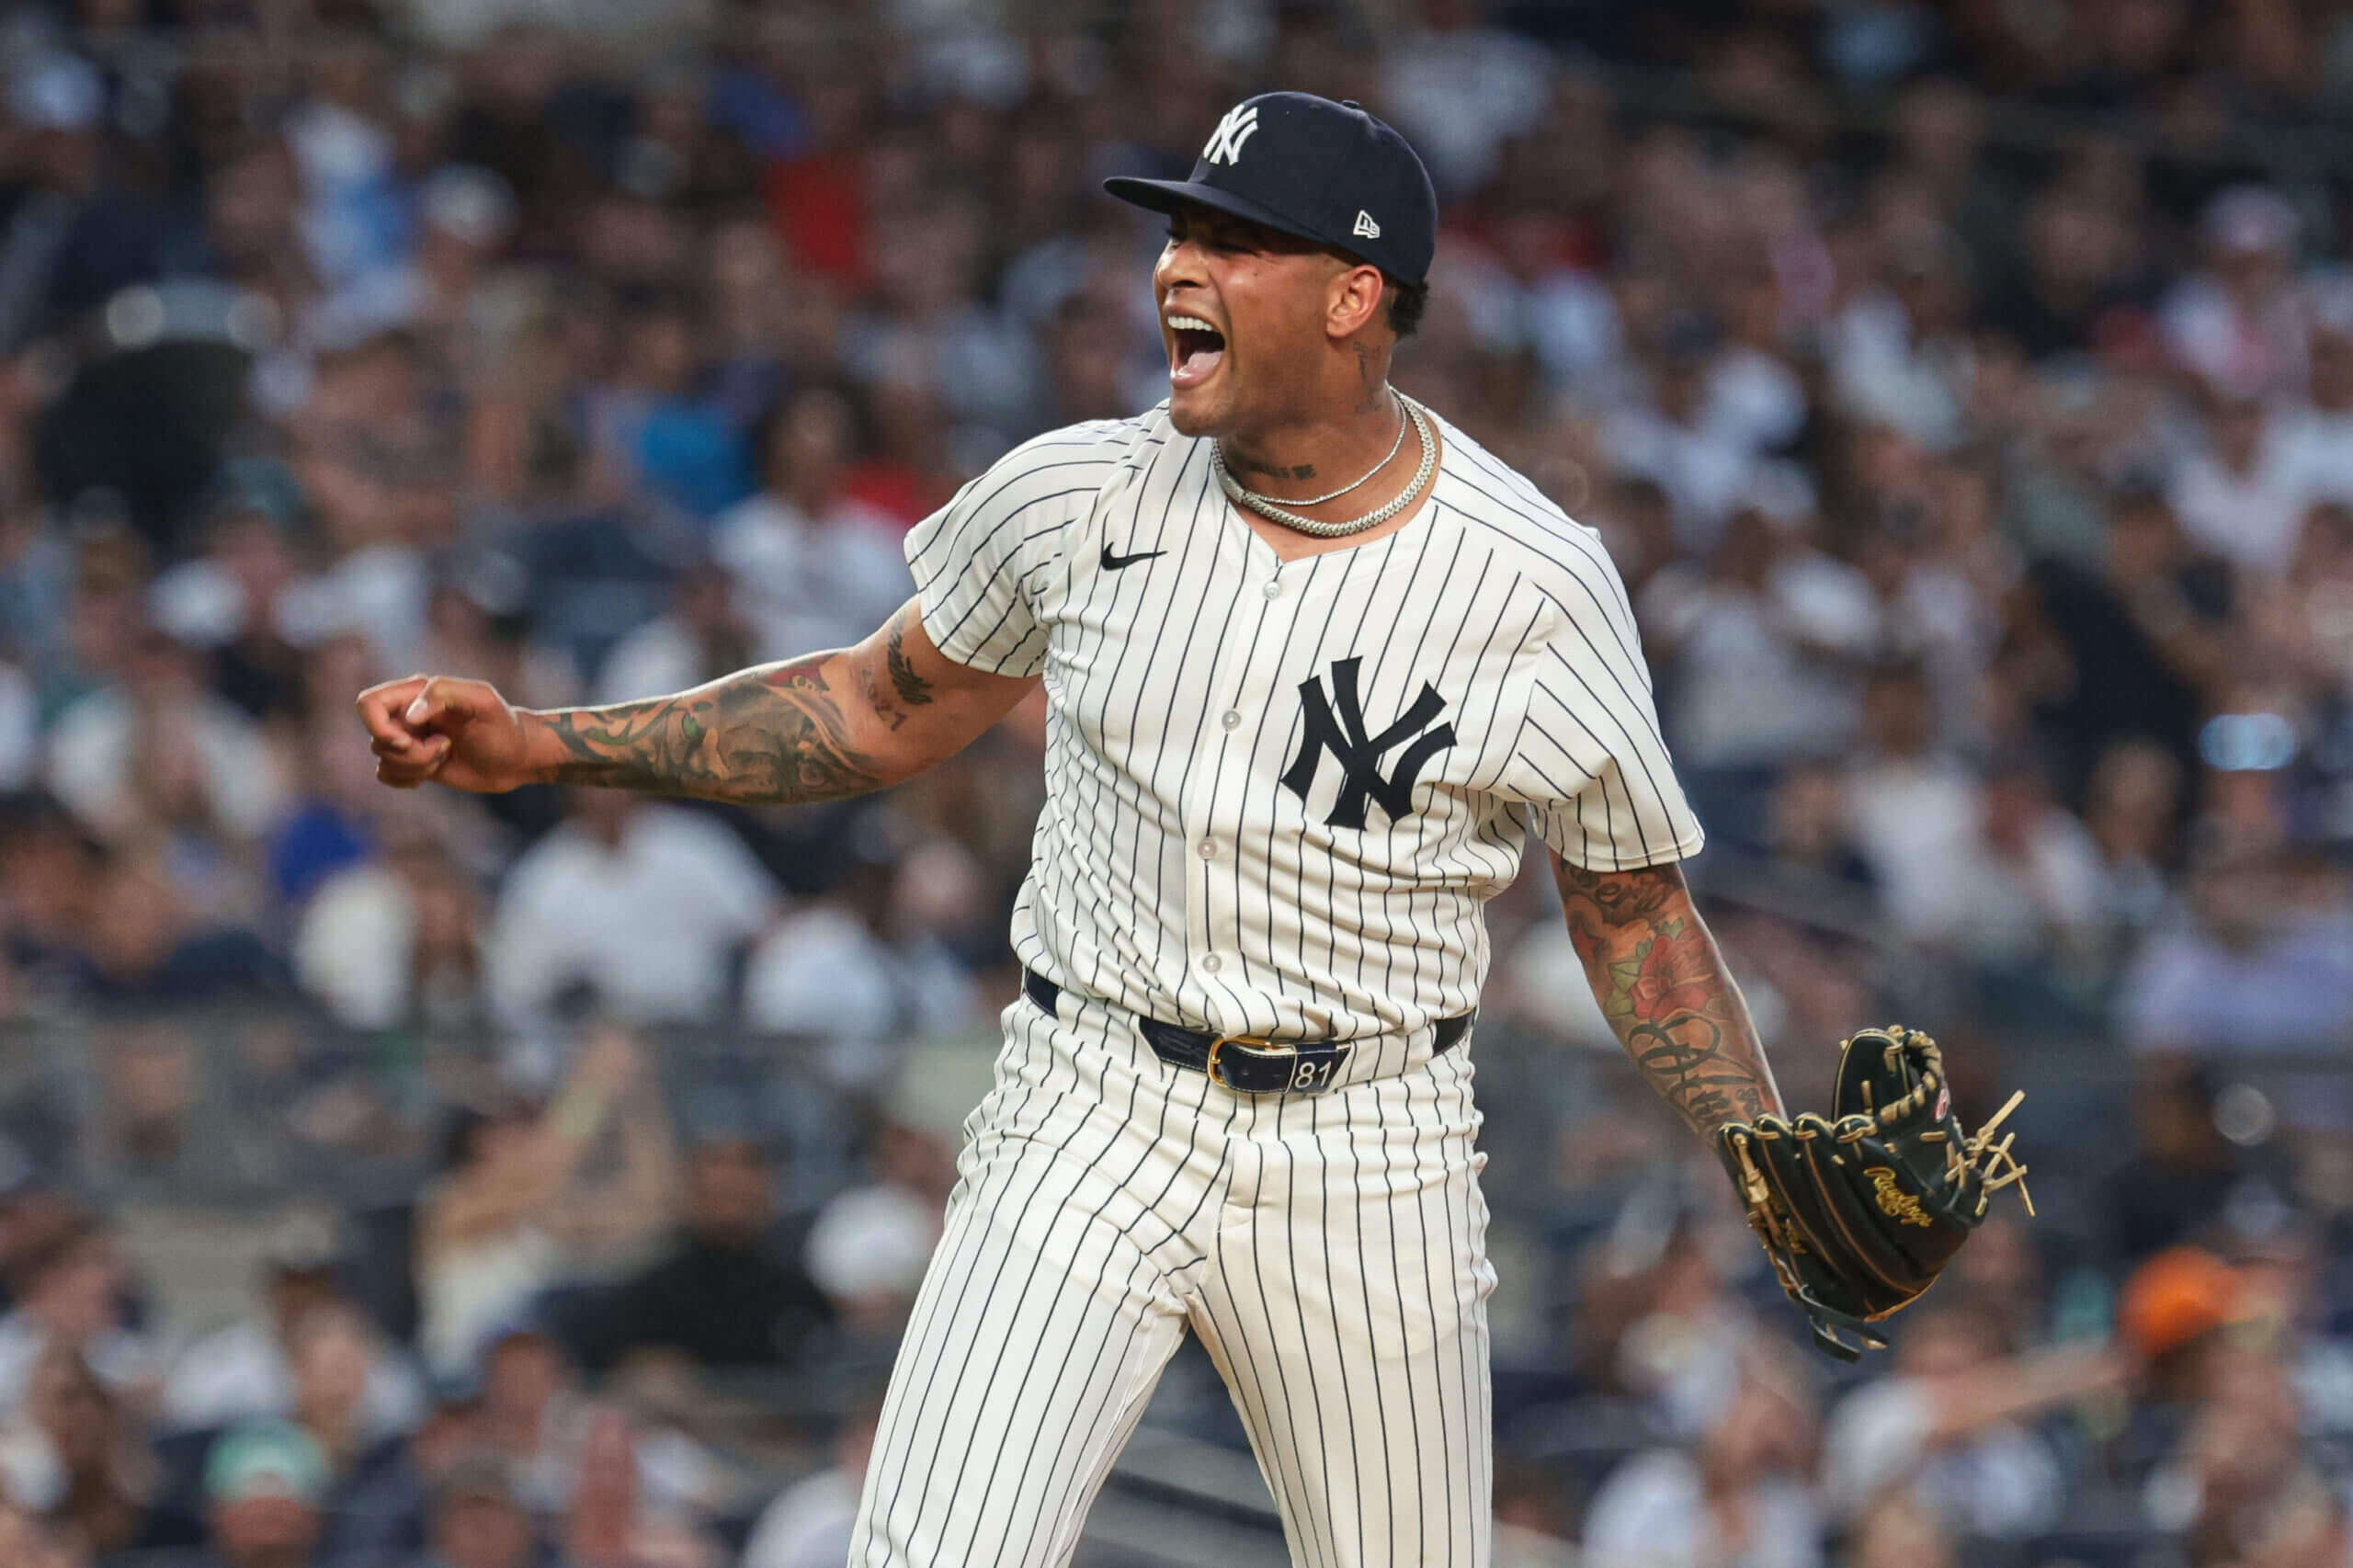 Yankees takeaways: 'It feels terrible' as losses continue to pile up